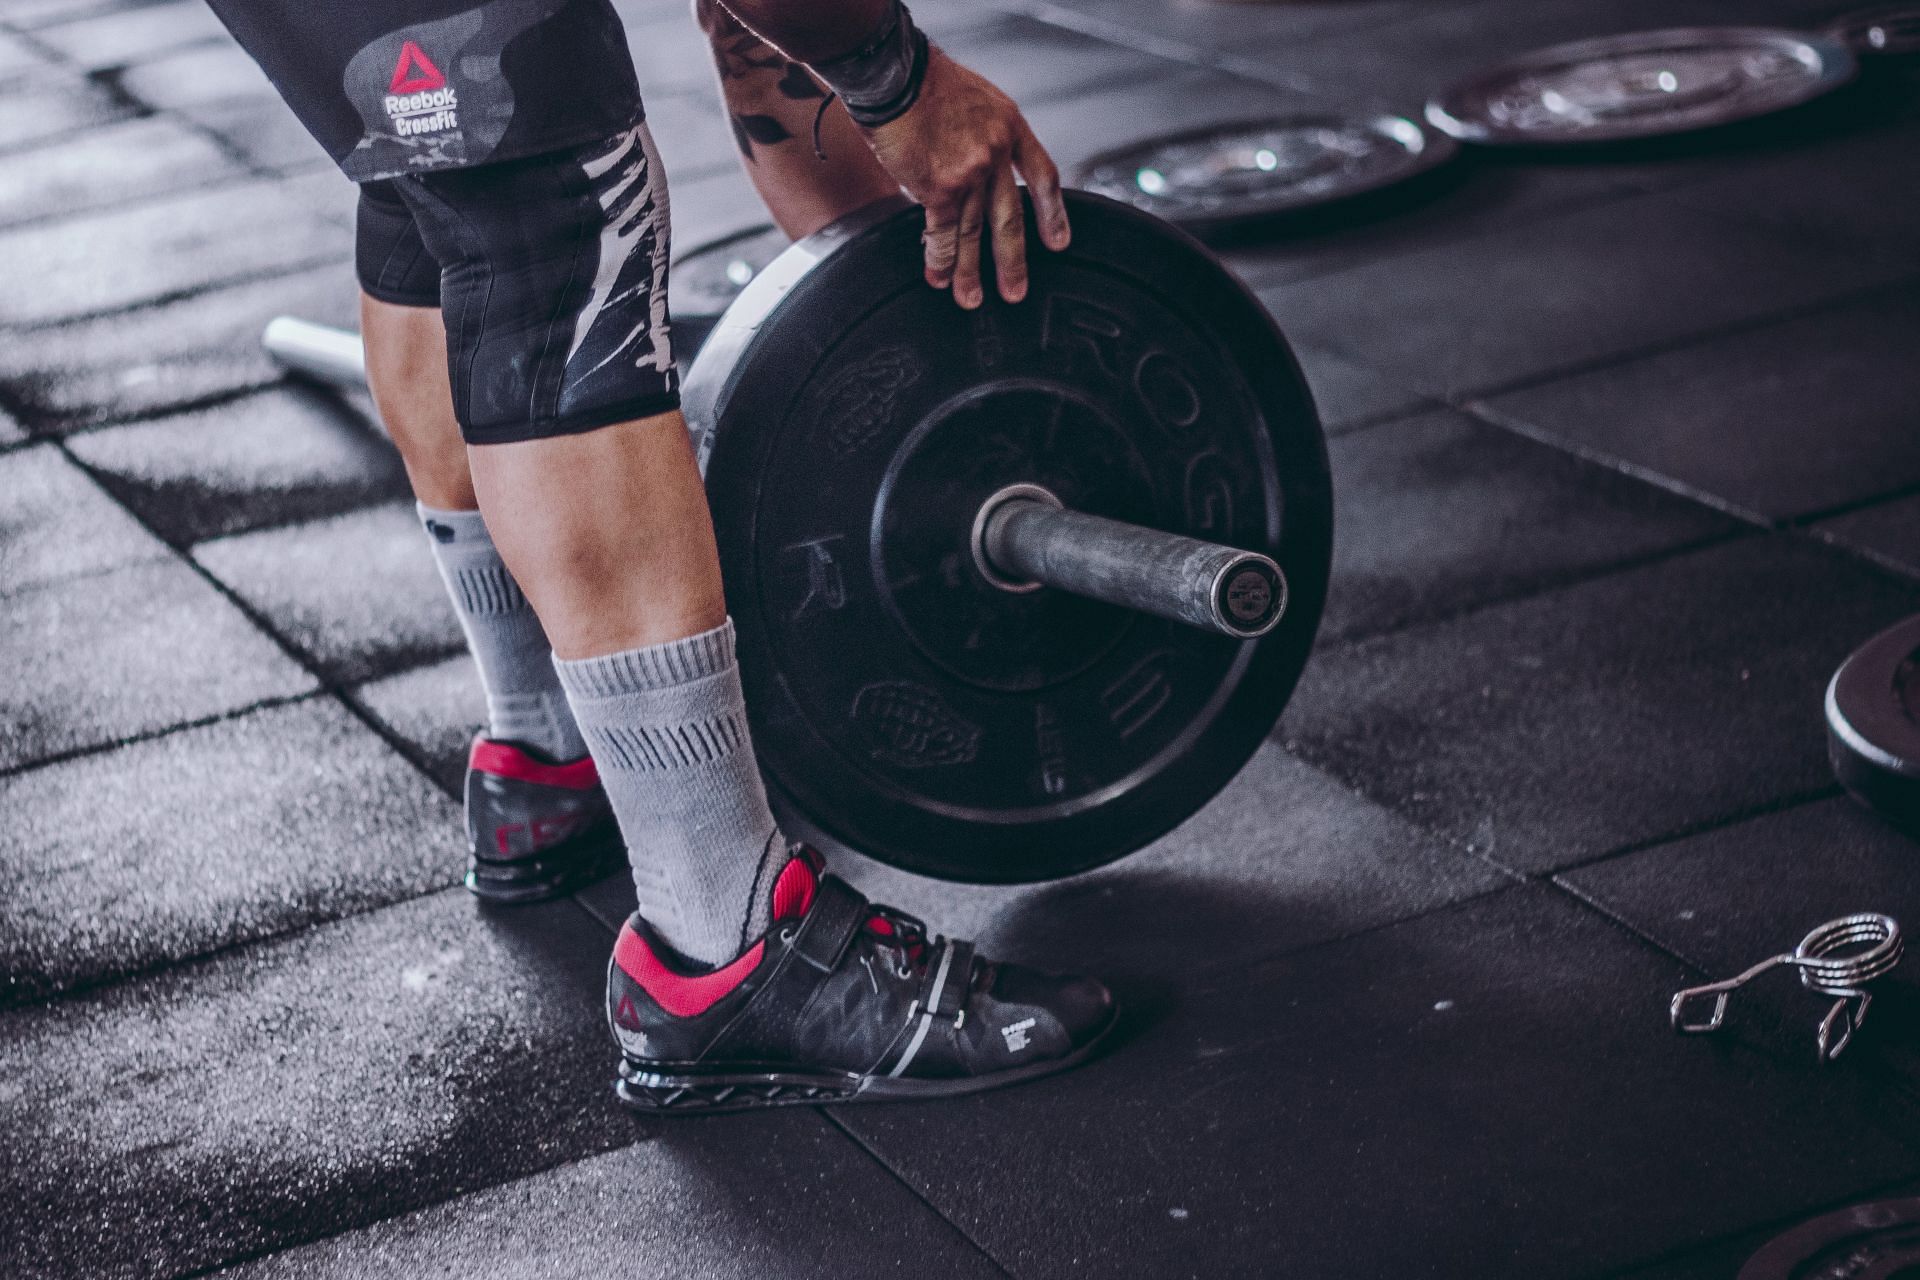 The underhand barbell row can help pull exercises. (Image via Pexels/Victor Freitas)